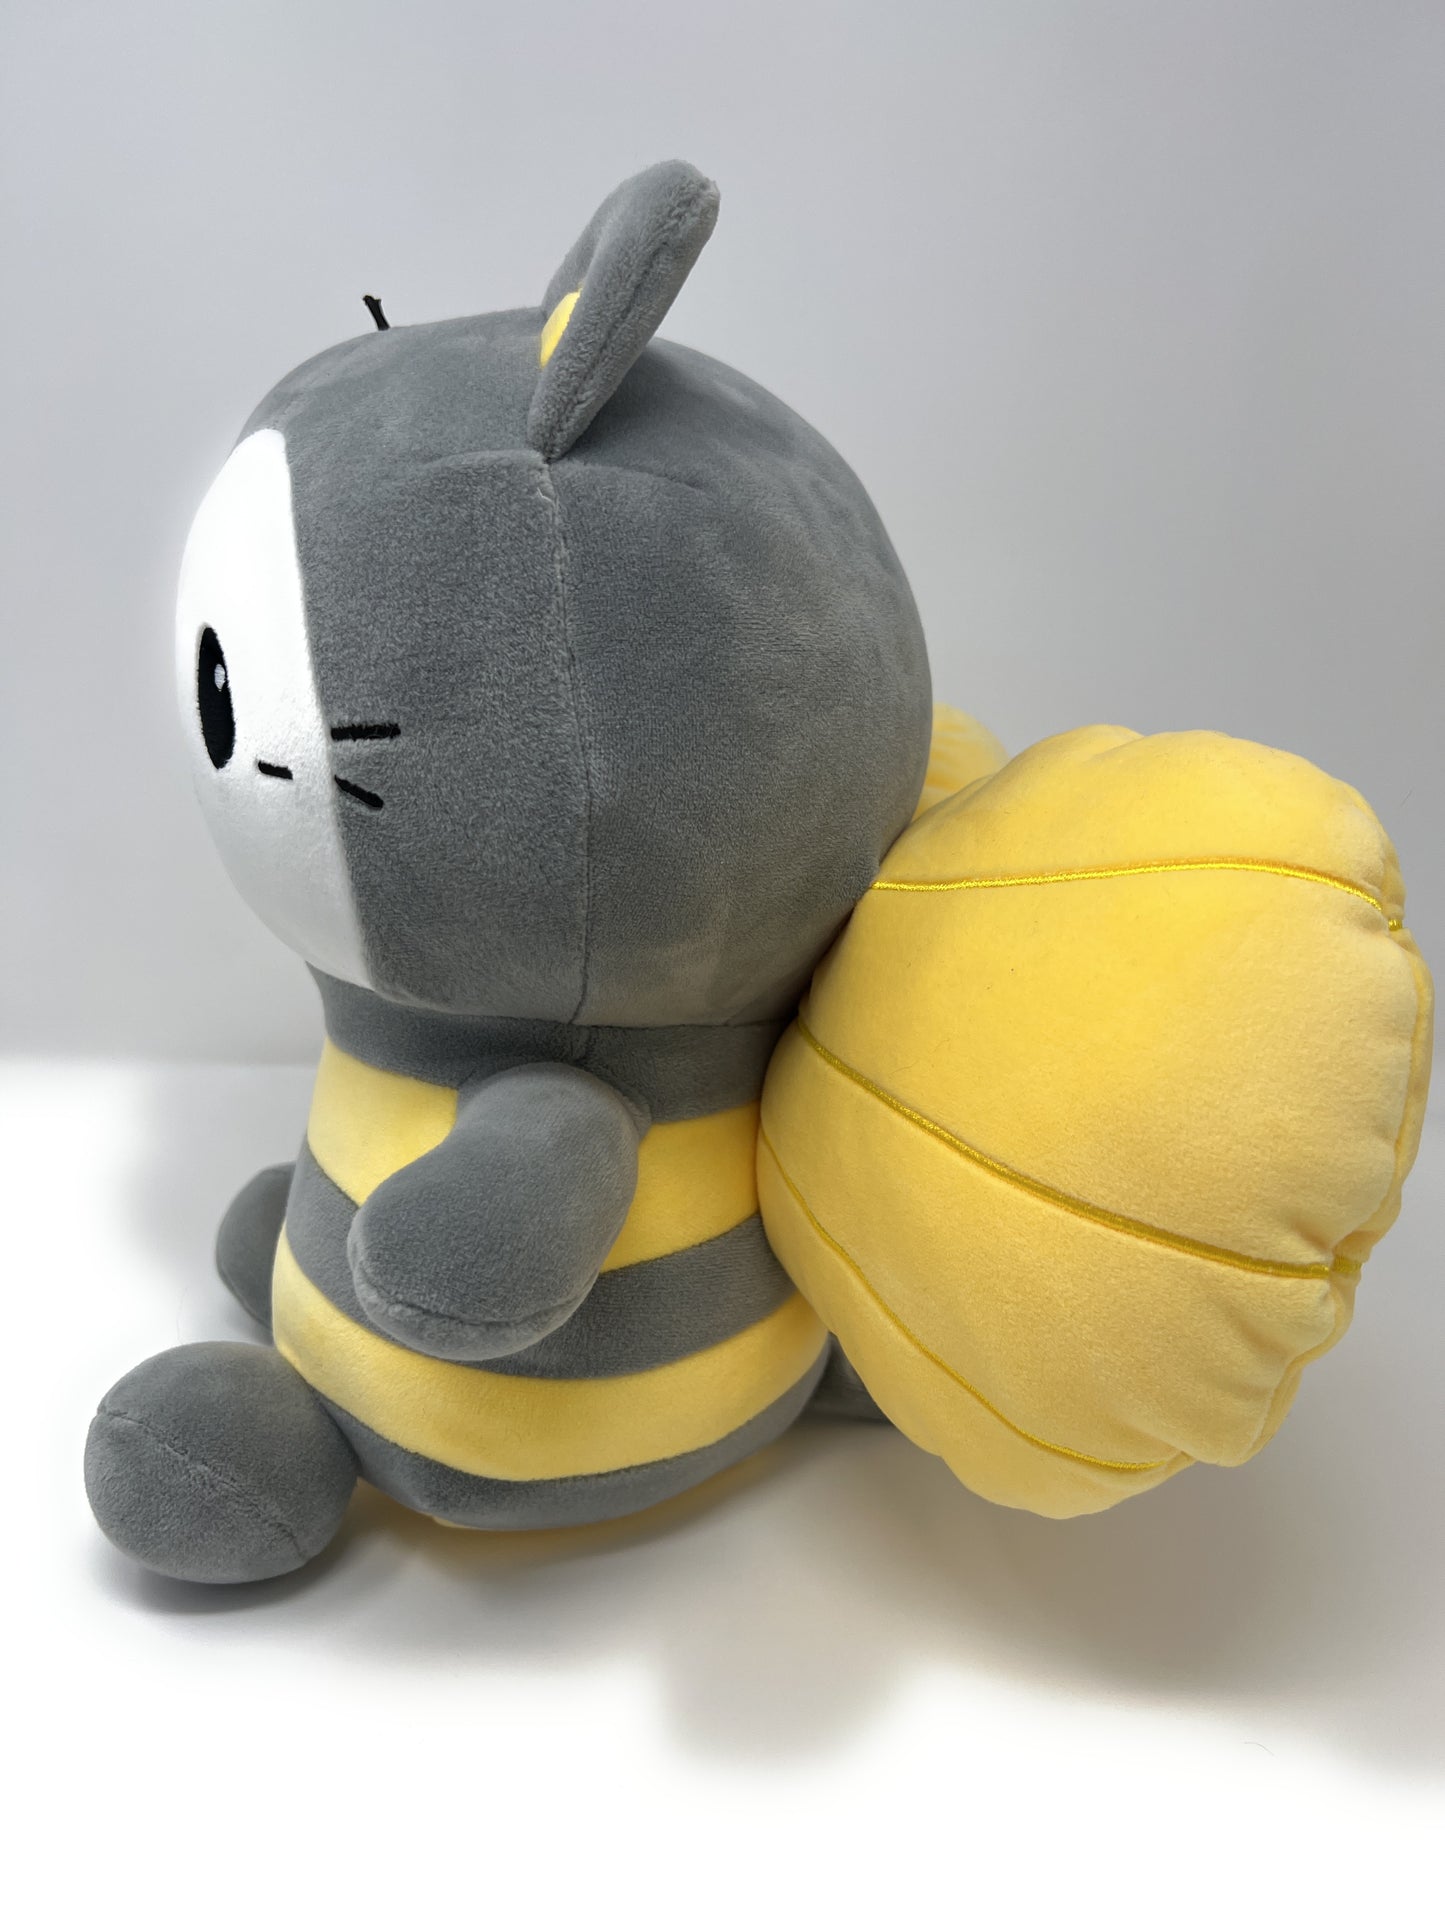 Make It Good 11-Inch Plush Toy: Cute Cat in Bee Costume, Soft and Cuddly Material